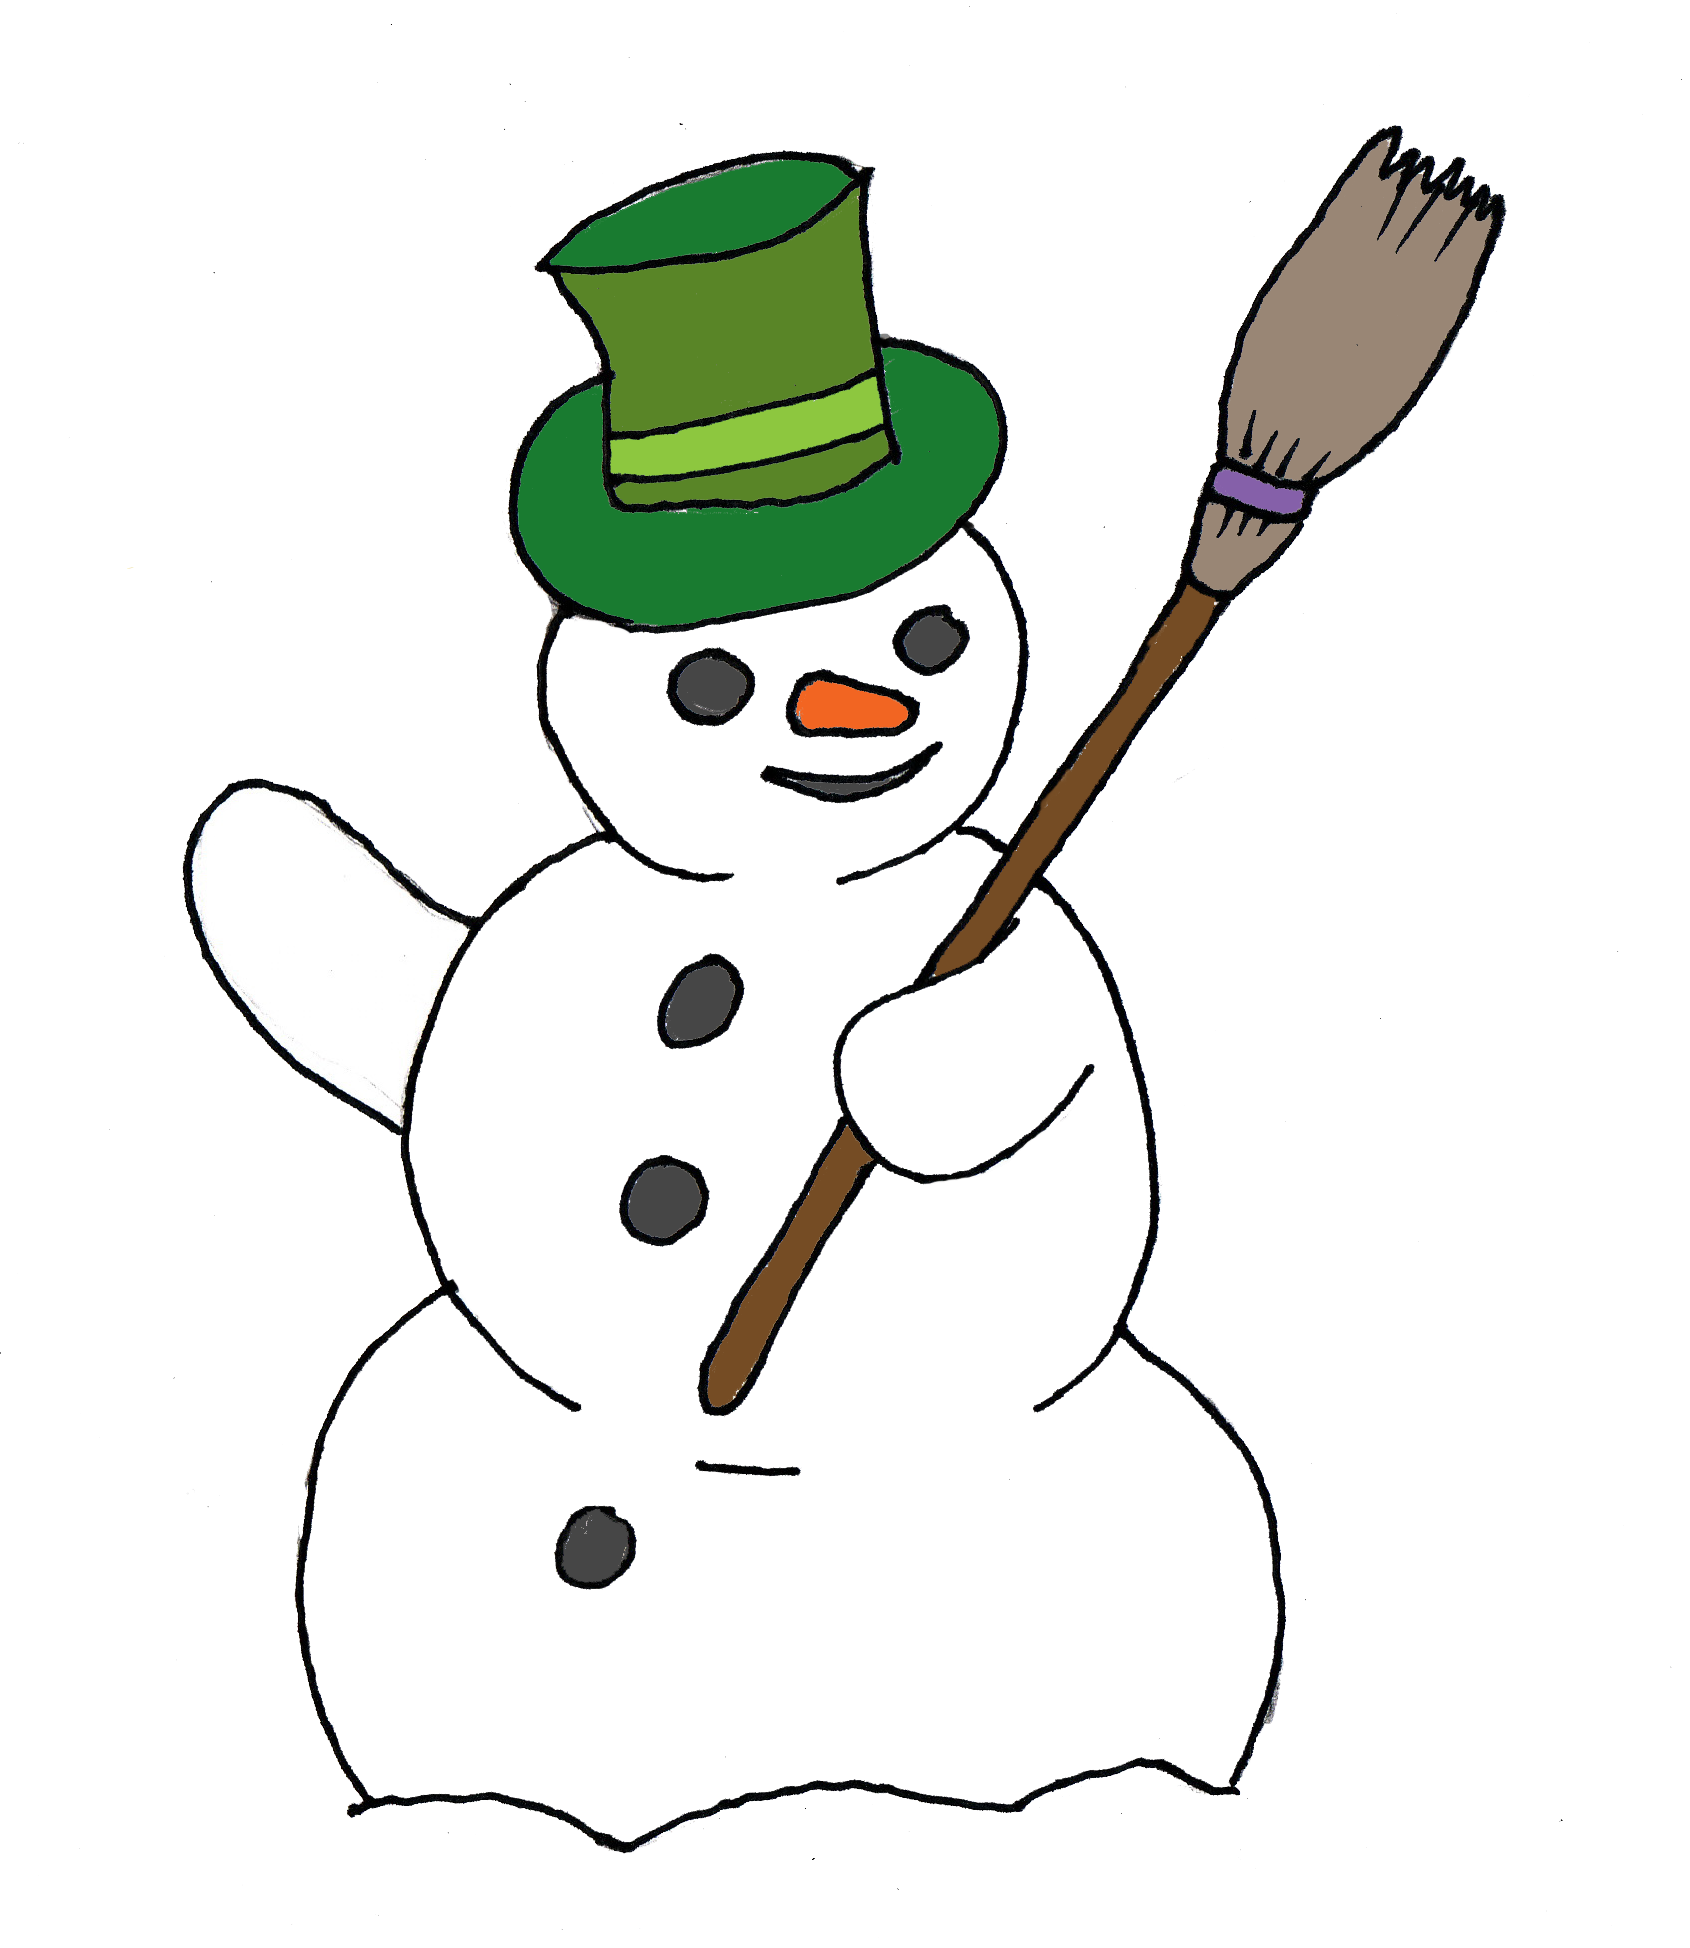 Cotton clipart snow ball. Winter poems songs and